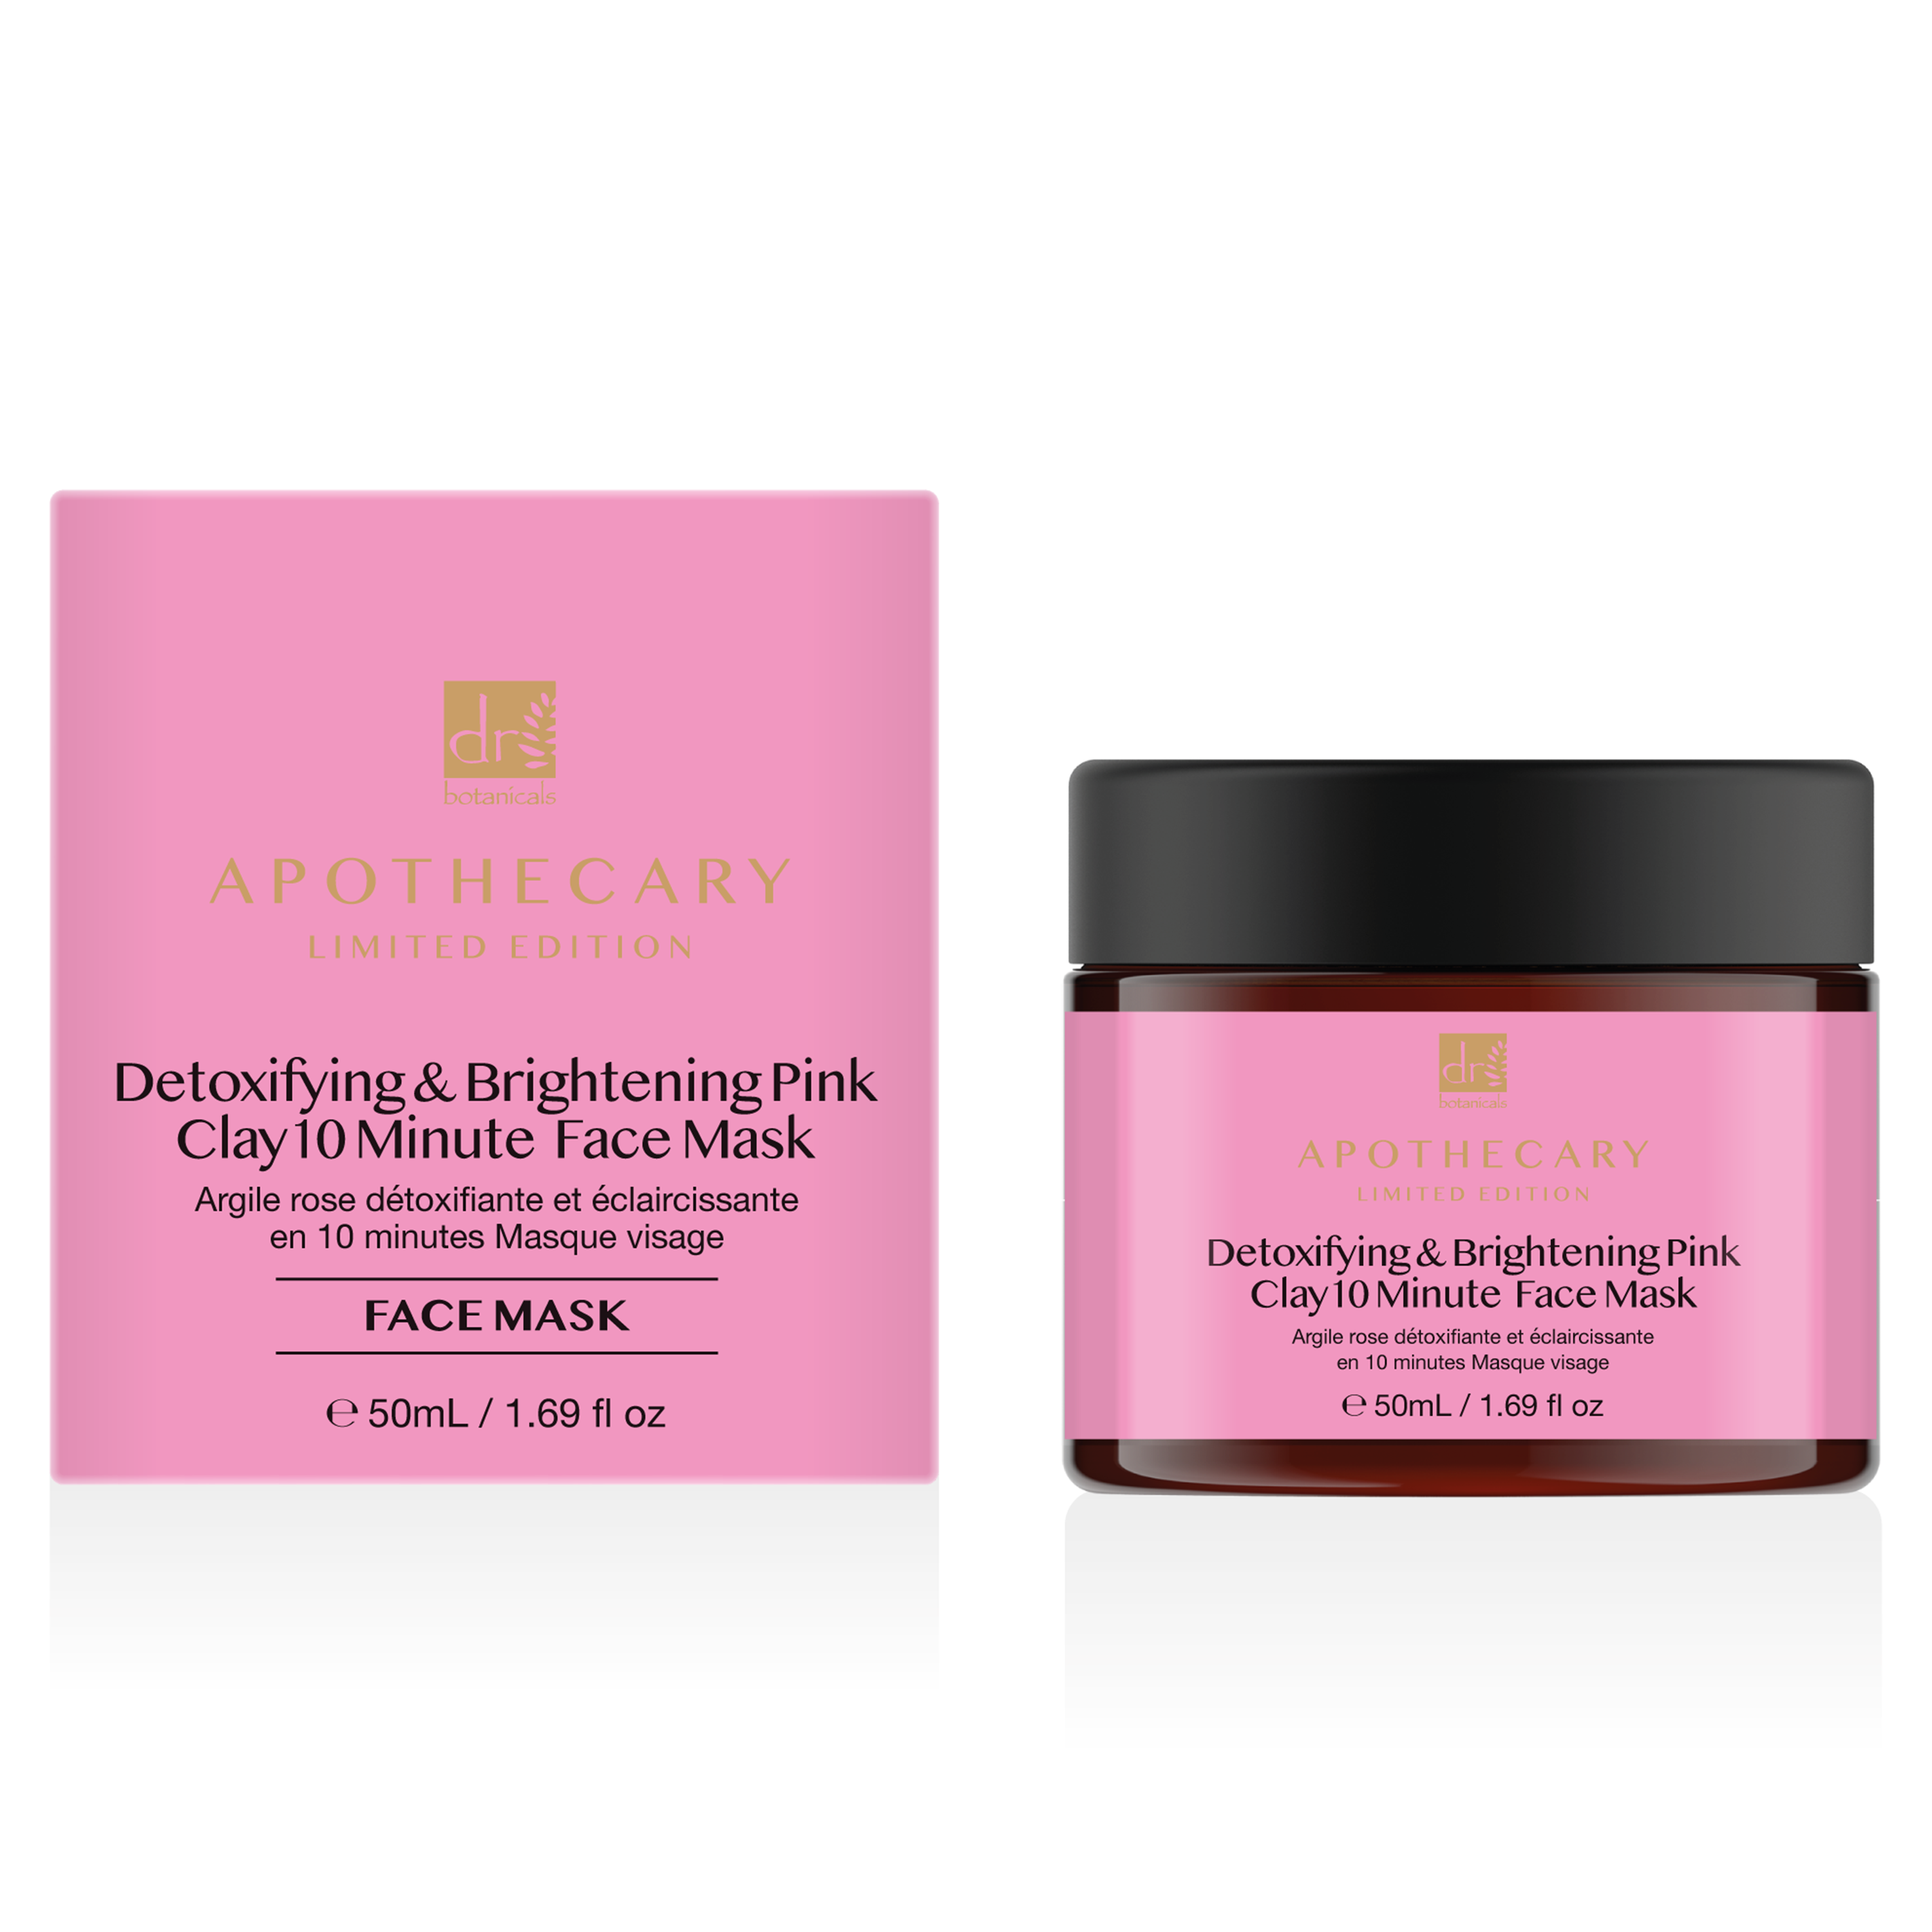 Detoxifying & Brightening Pink Clay 10 Minute Face Mask 50ml